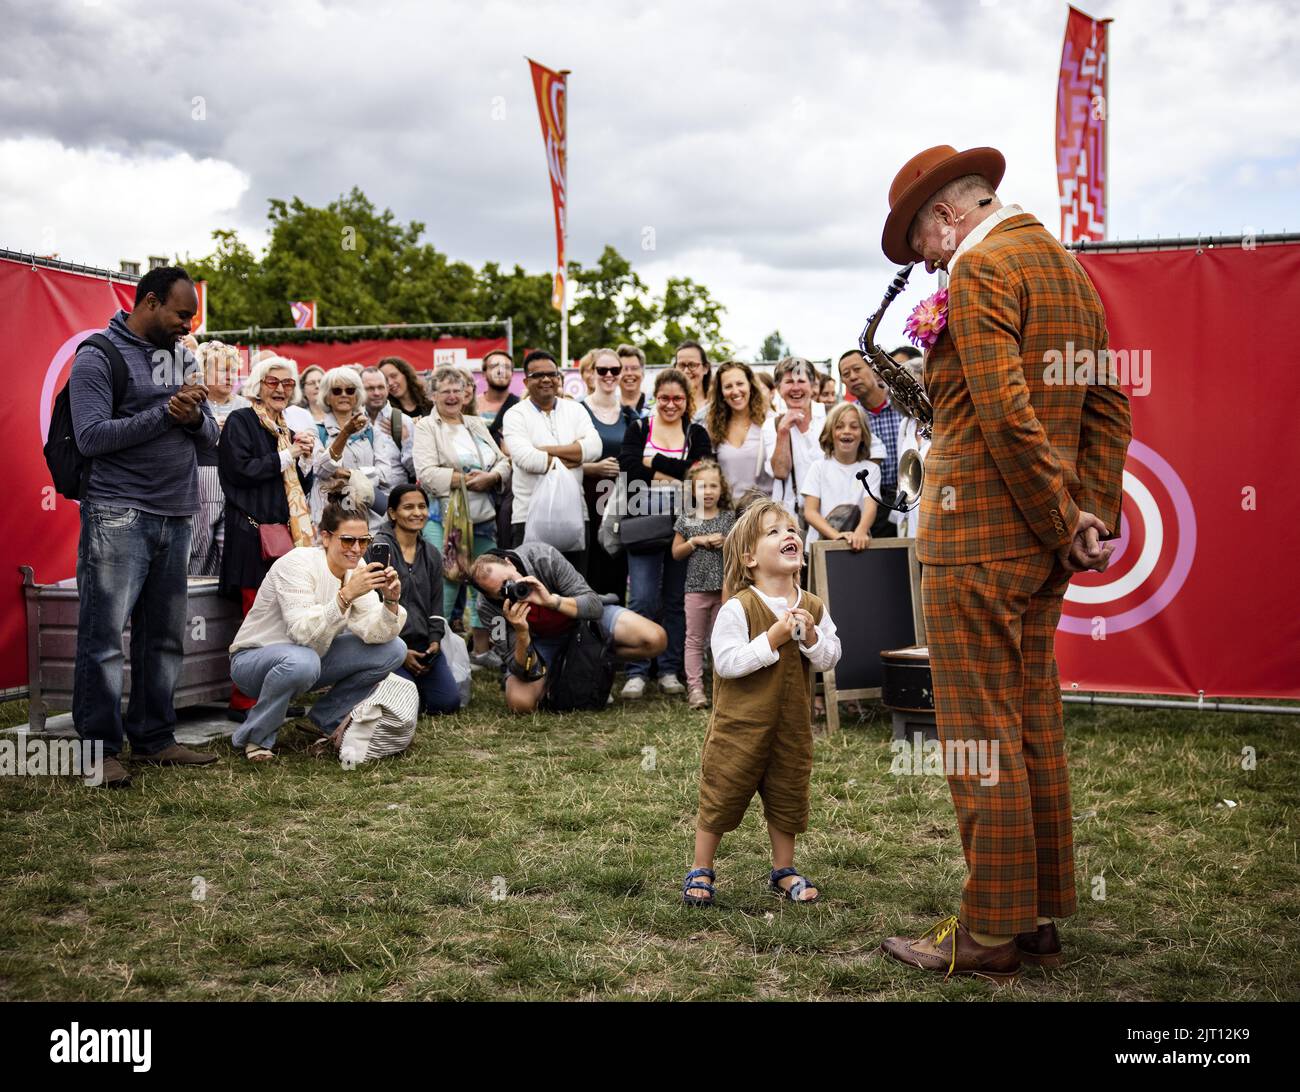 2022-08-27 13:44:17 AMSTERDAM - Slampampers during the second day of the Uitmarkt, the national start of the cultural season. ANP RAMON VAN FLYMEN netherlands out - belgium out Stock Photo